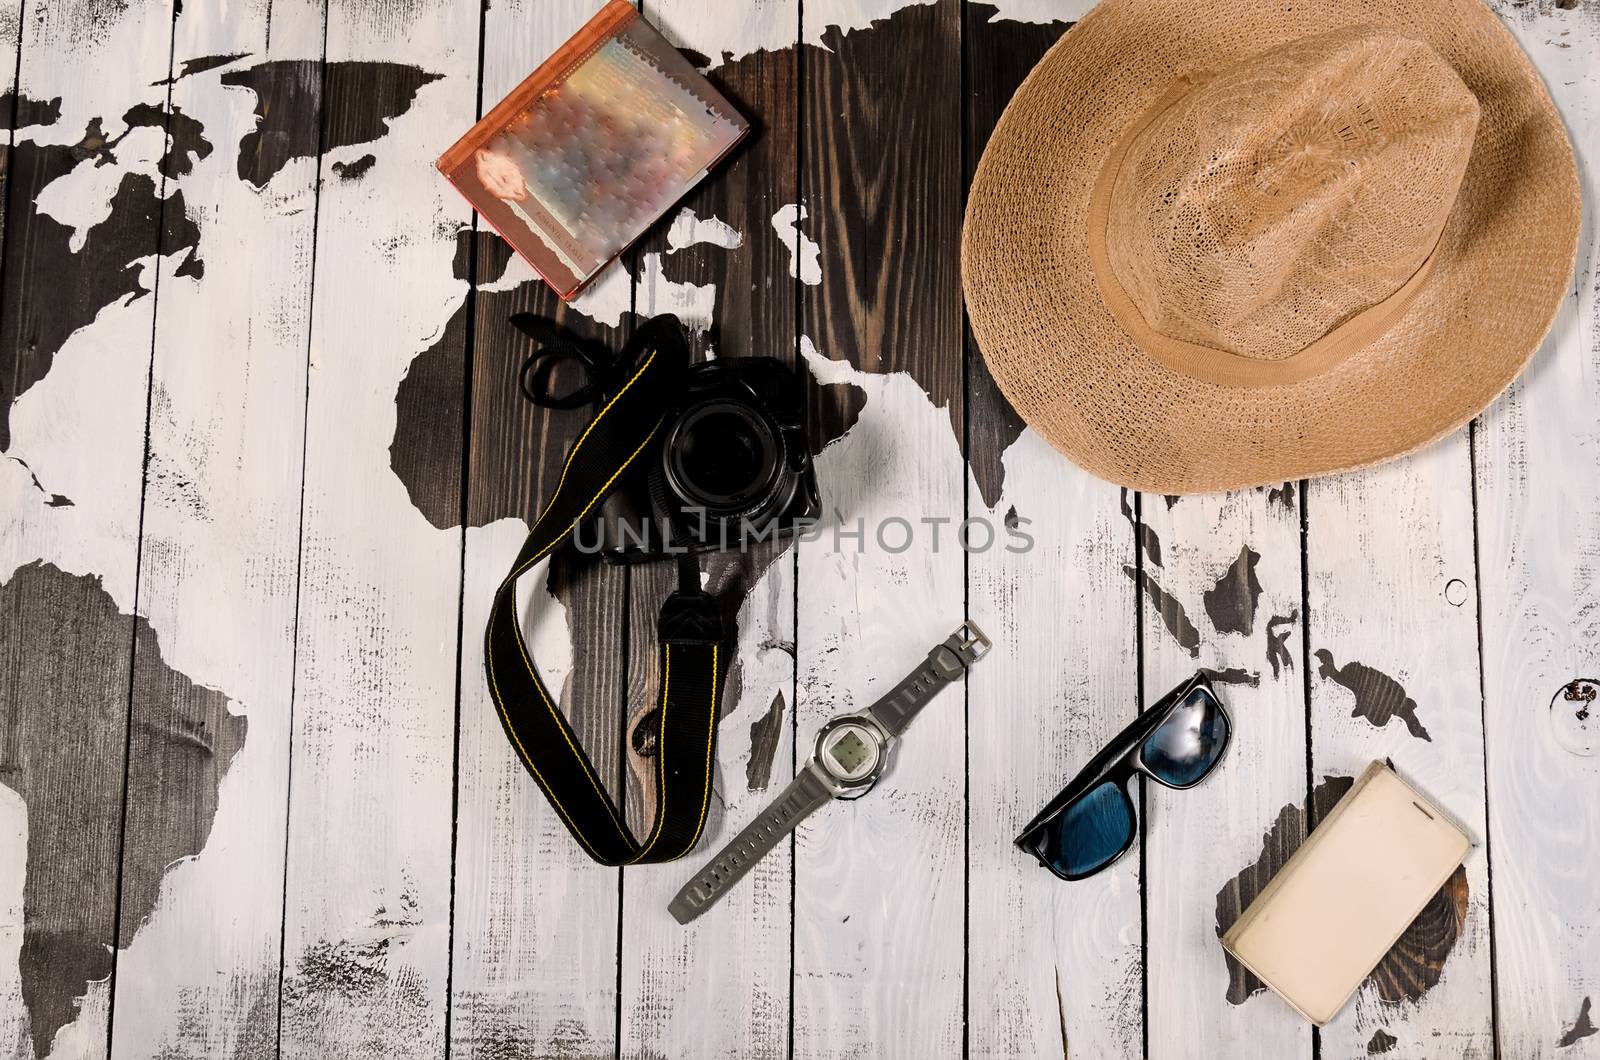 Table with open map showing plans for travelling and related items including watch smartphone sunglasses hat notebook and camera by andre_dechapelle